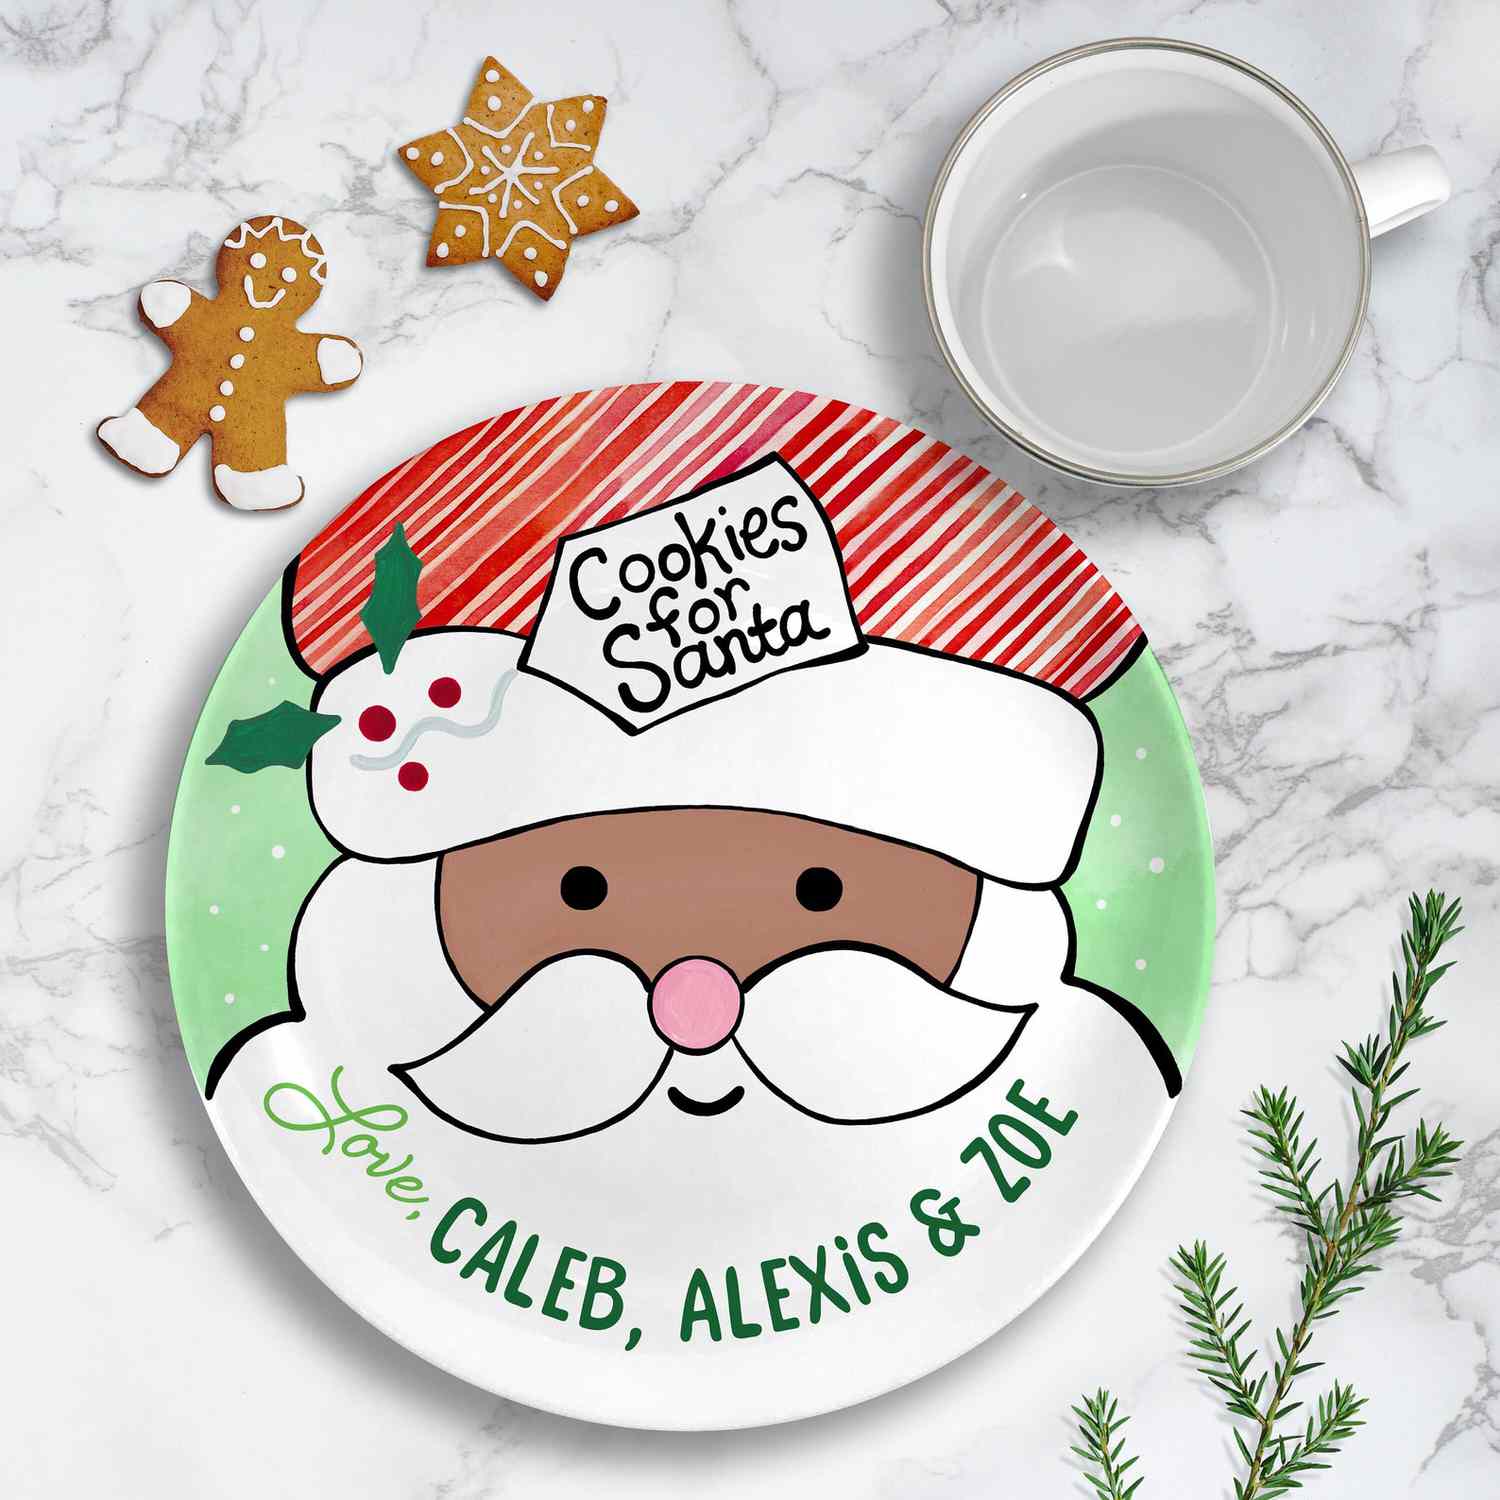 Little Worm Studio Personalized Cookies for Santa Plate